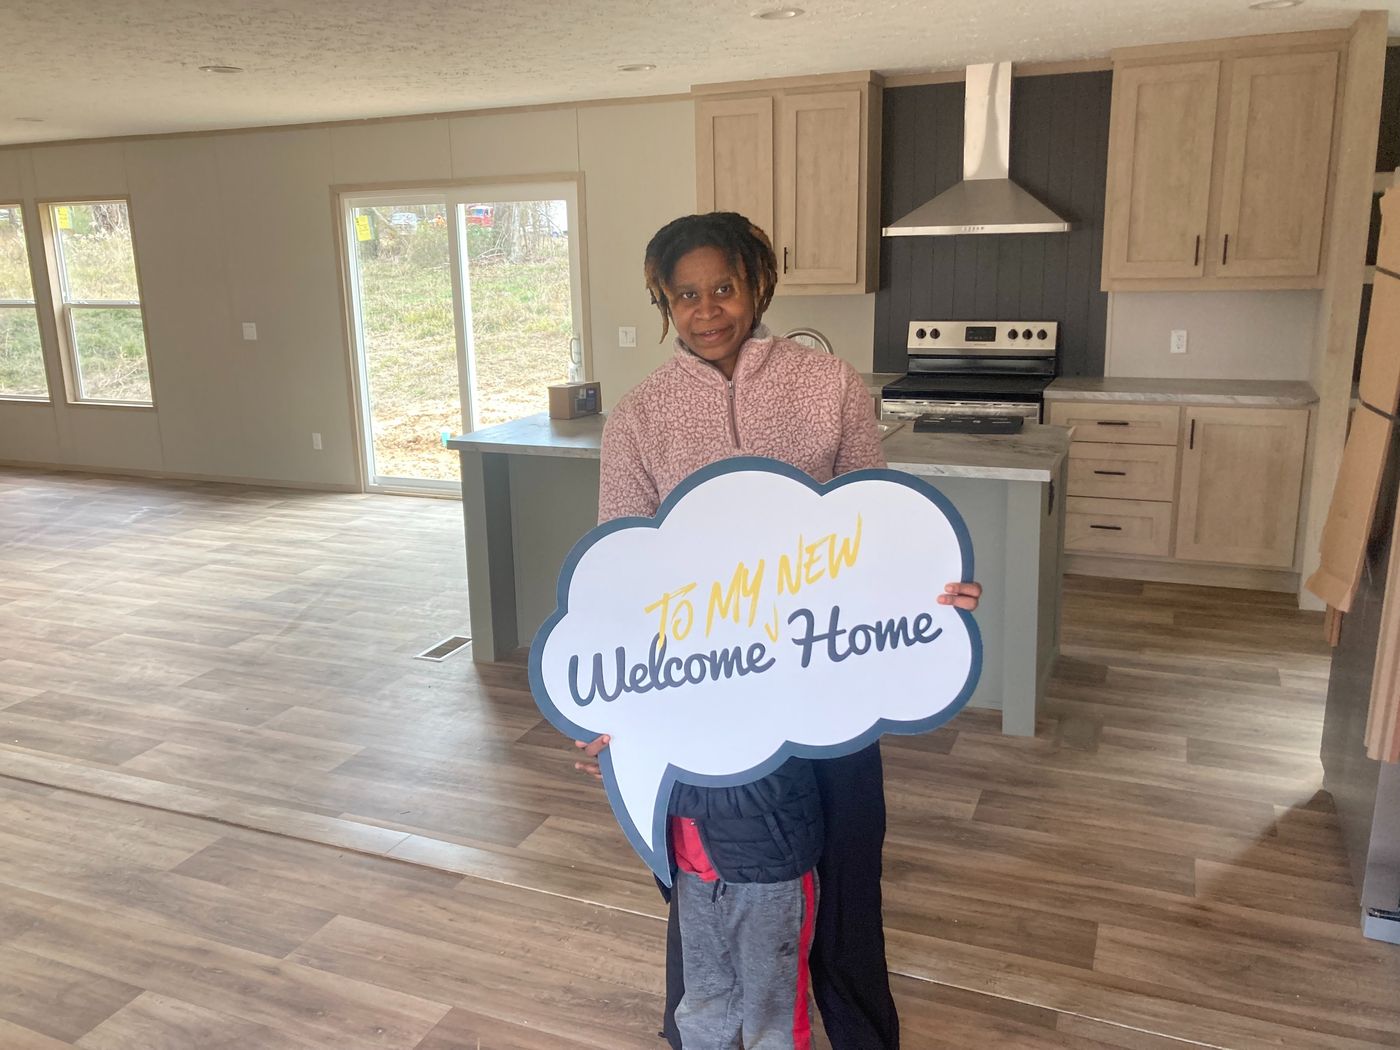 DOROTHY G. welcome home image